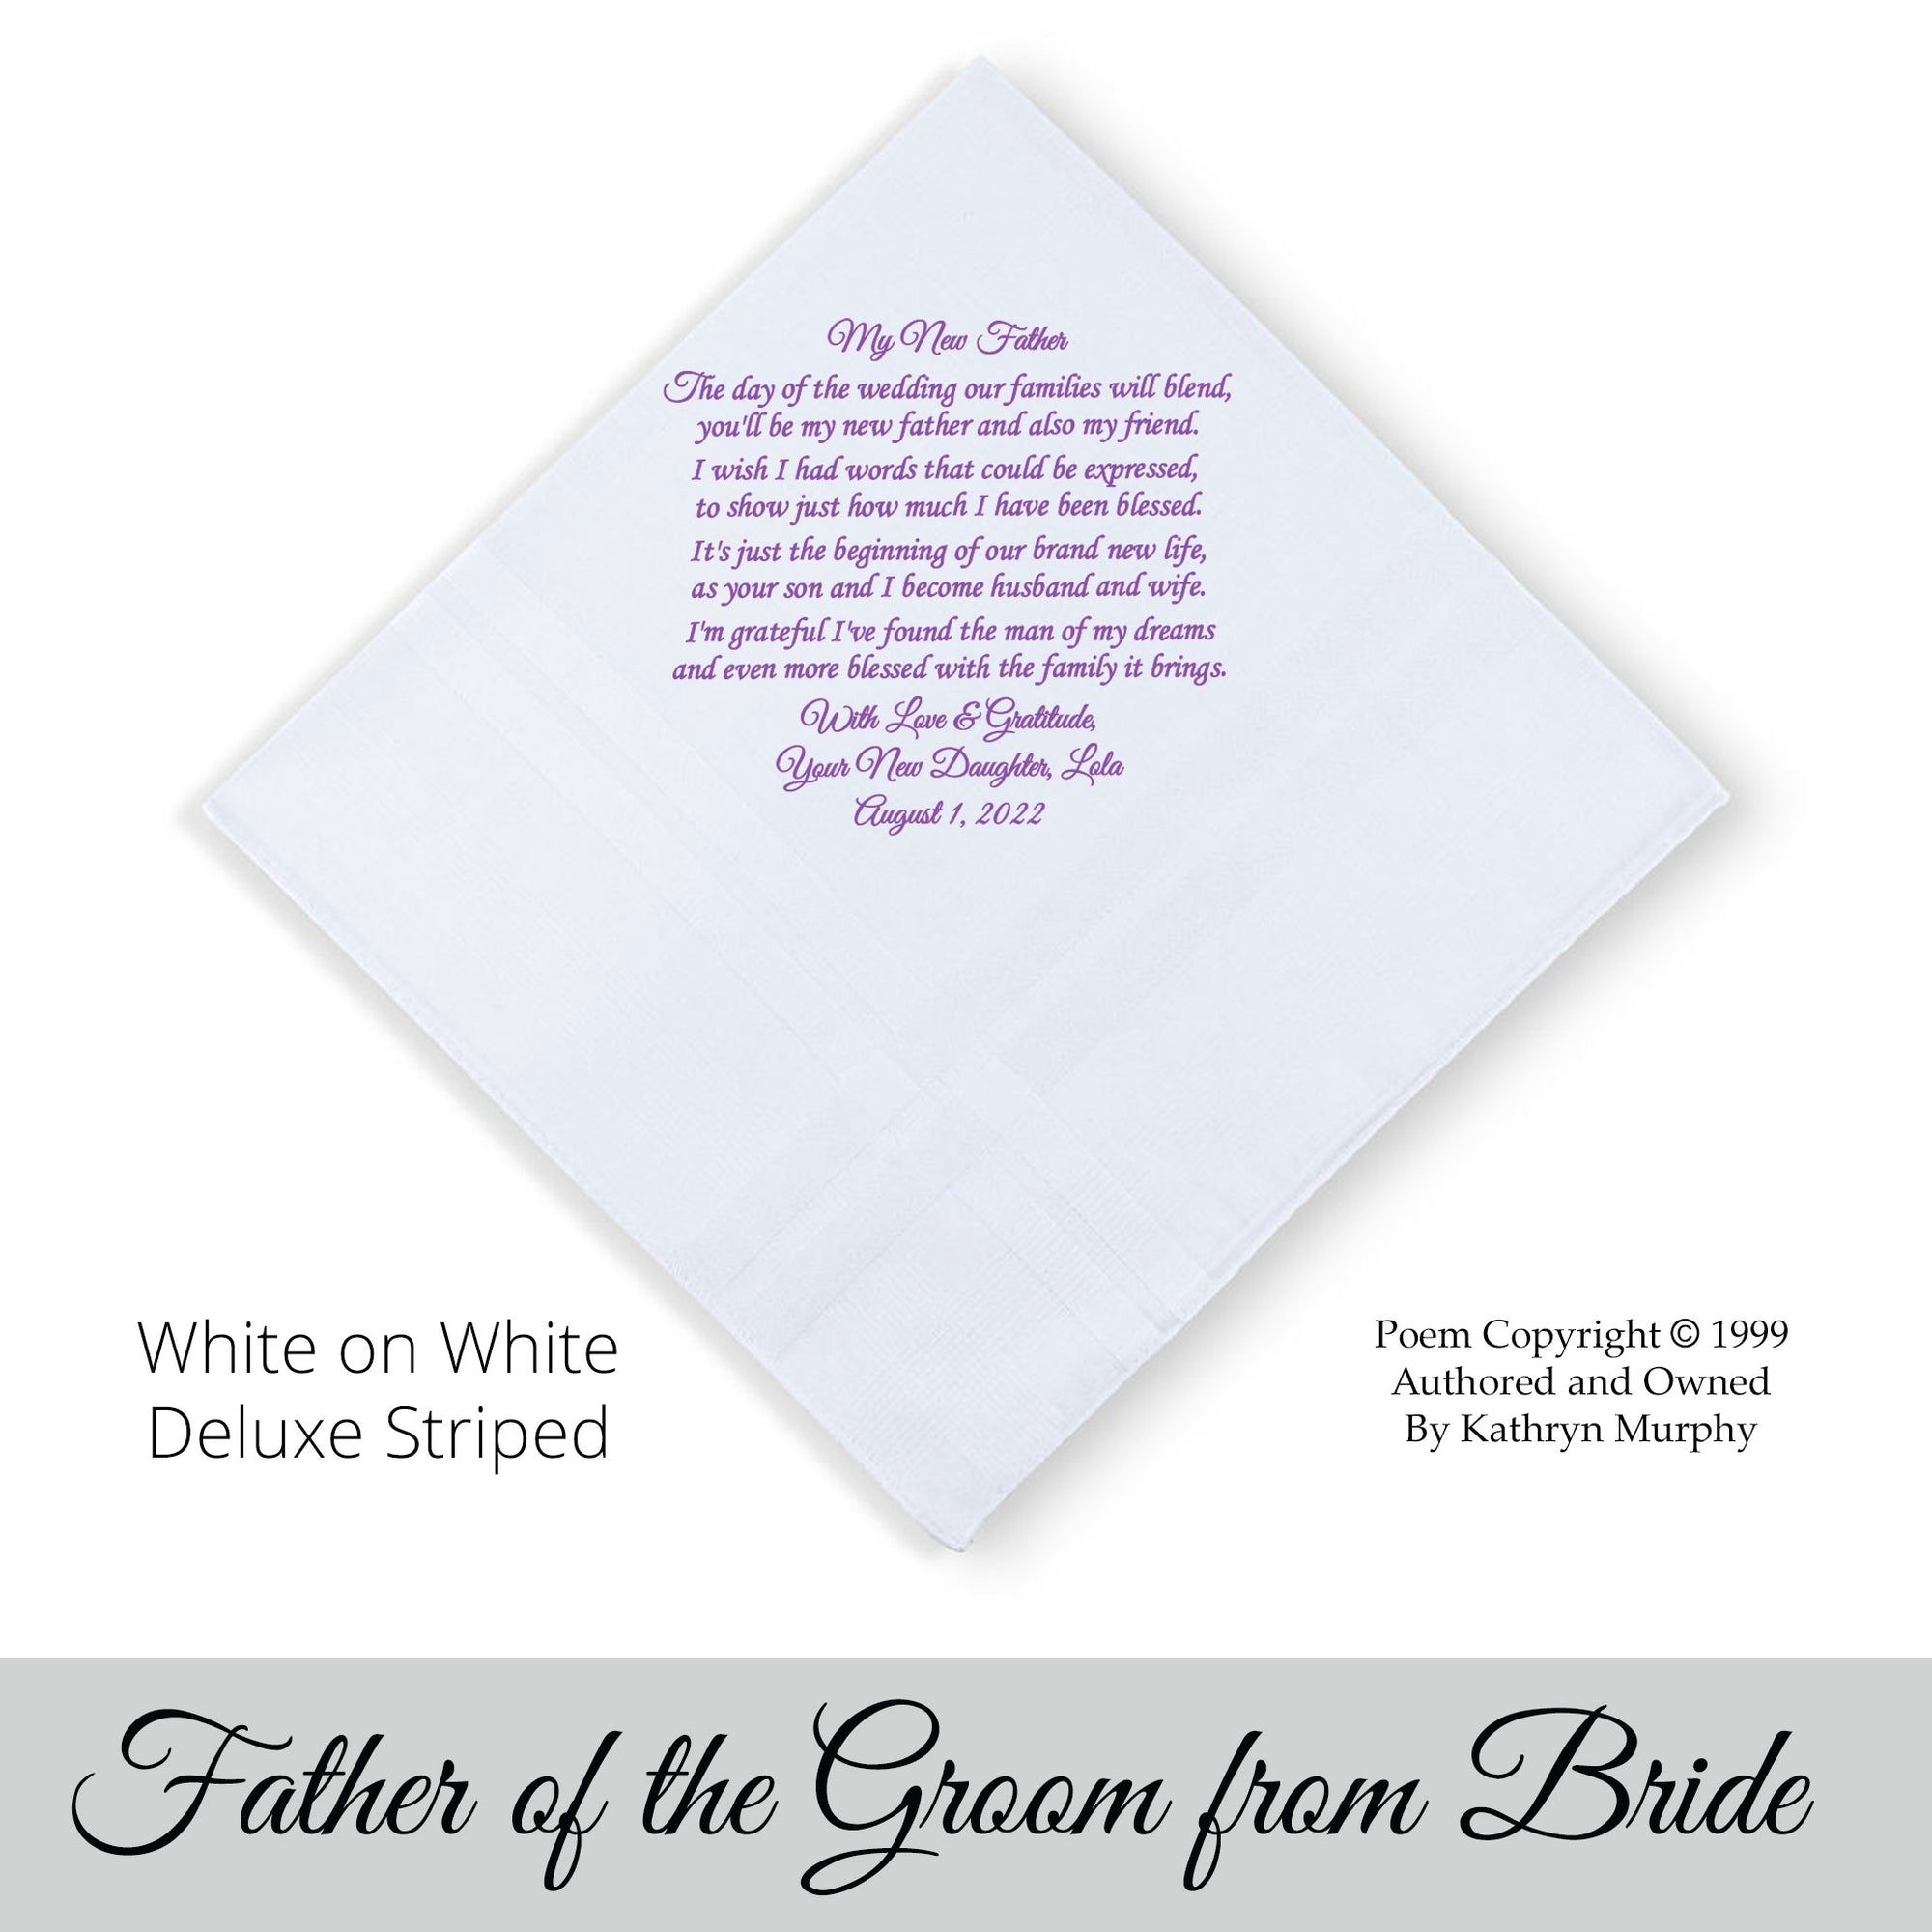 Father of the groom poem printed hankie from the bride